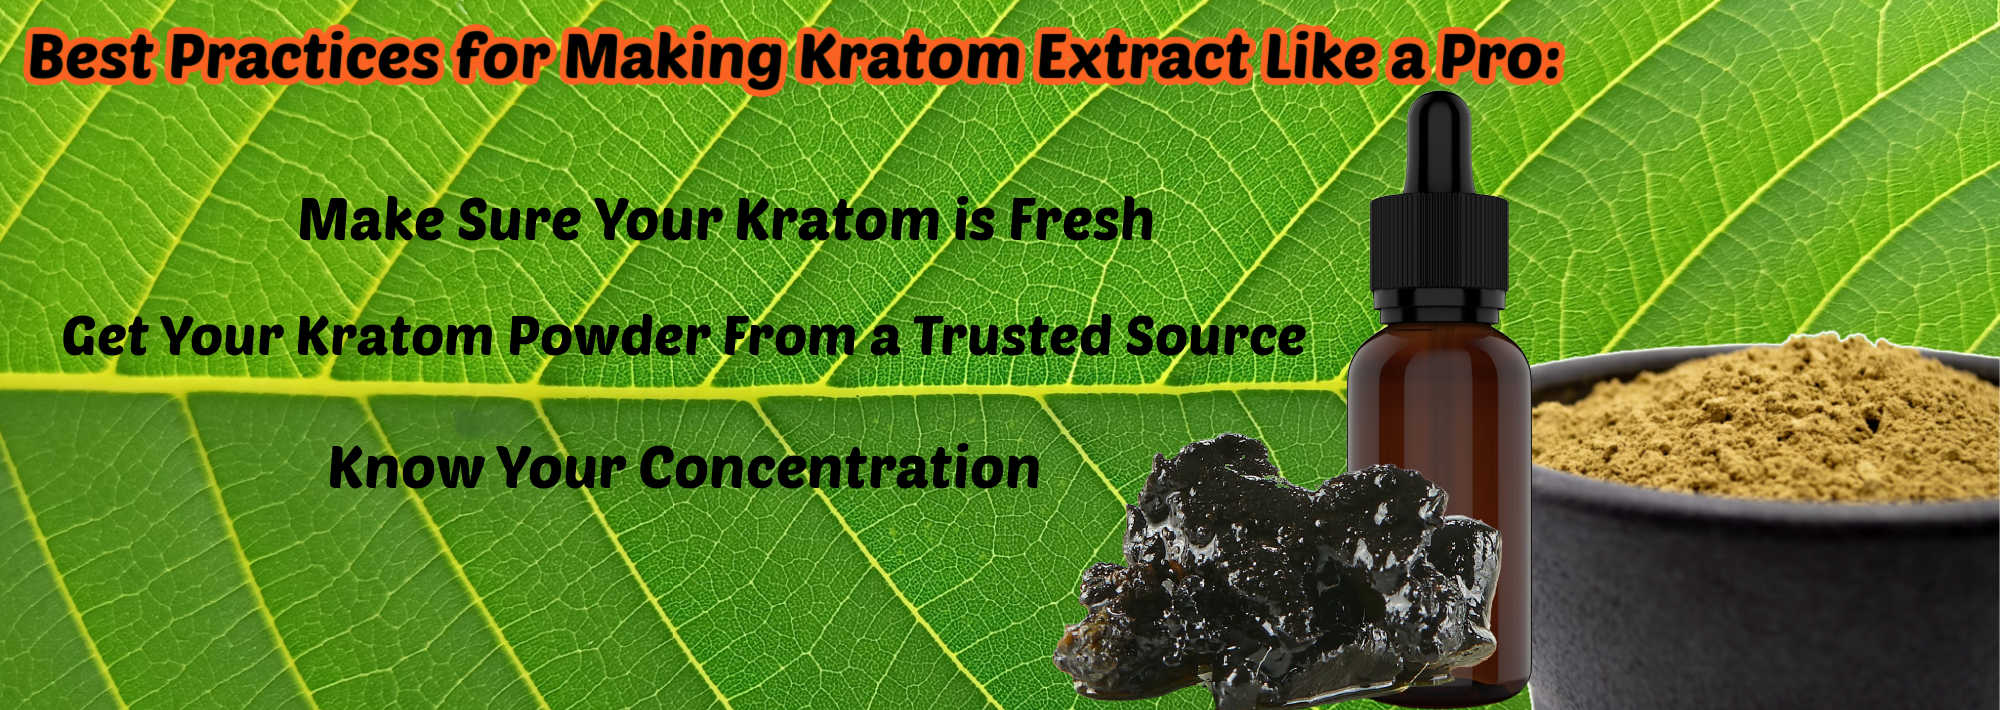 image of best practices to make kratom extract like a pro